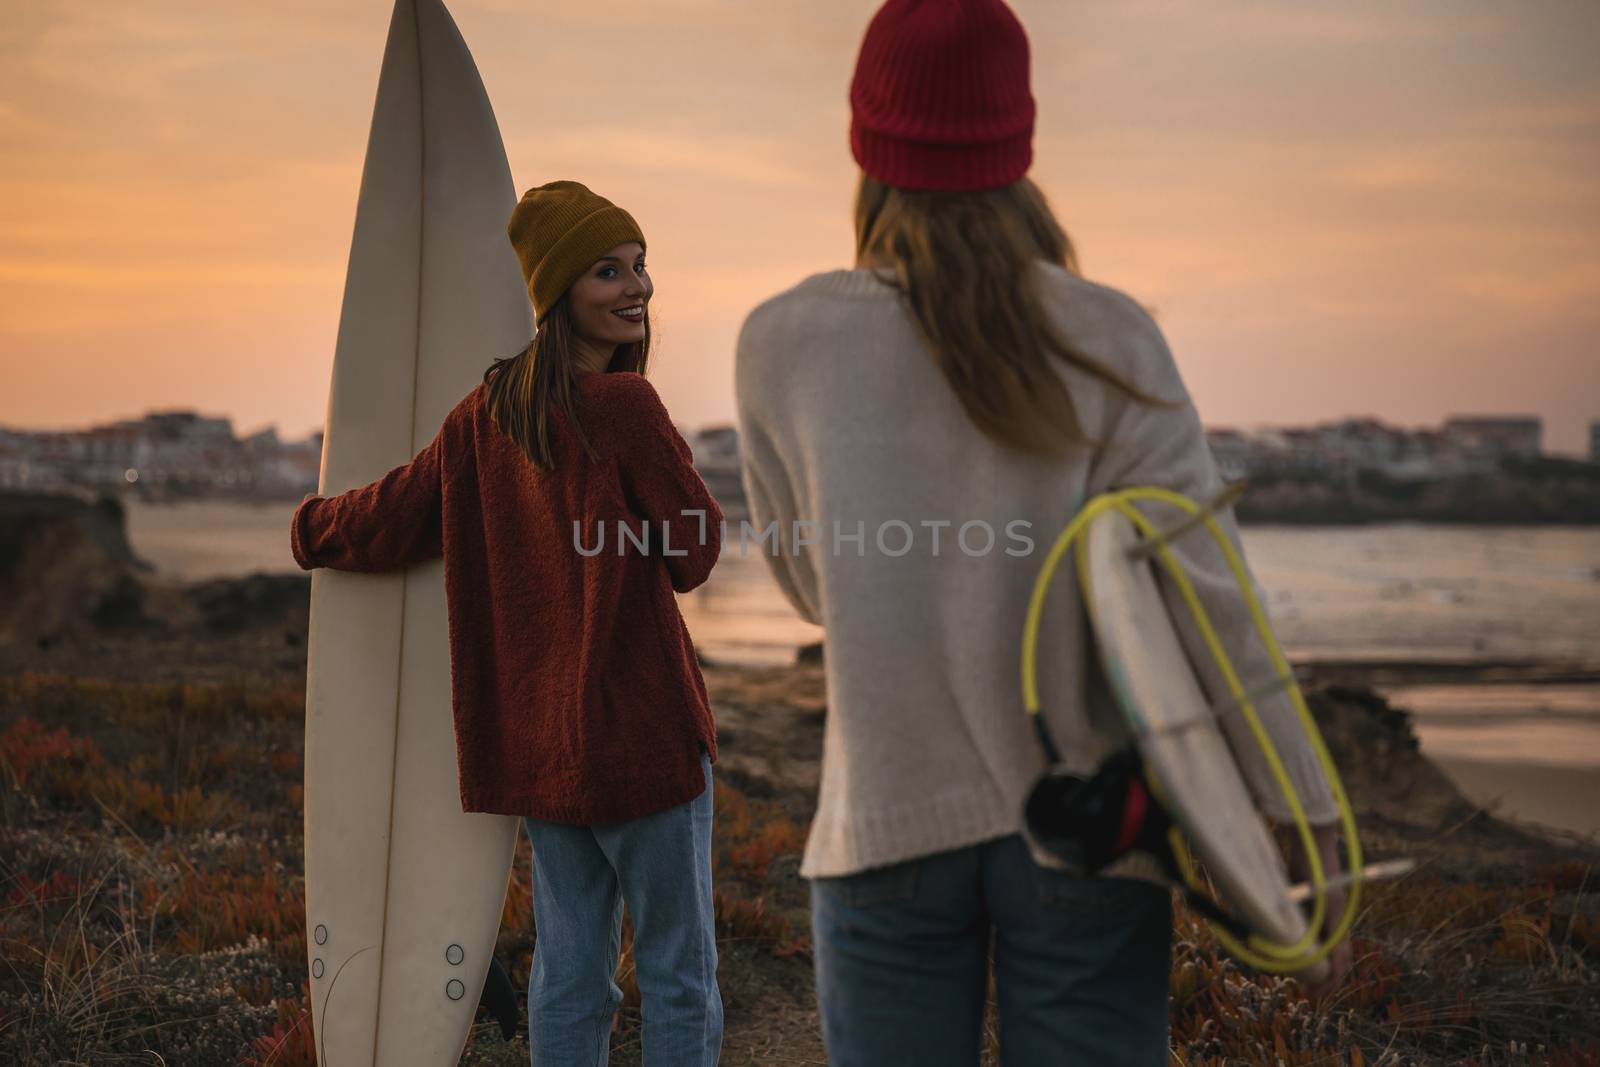 Shot of two female friends holding their surfboards while looking to the ocean